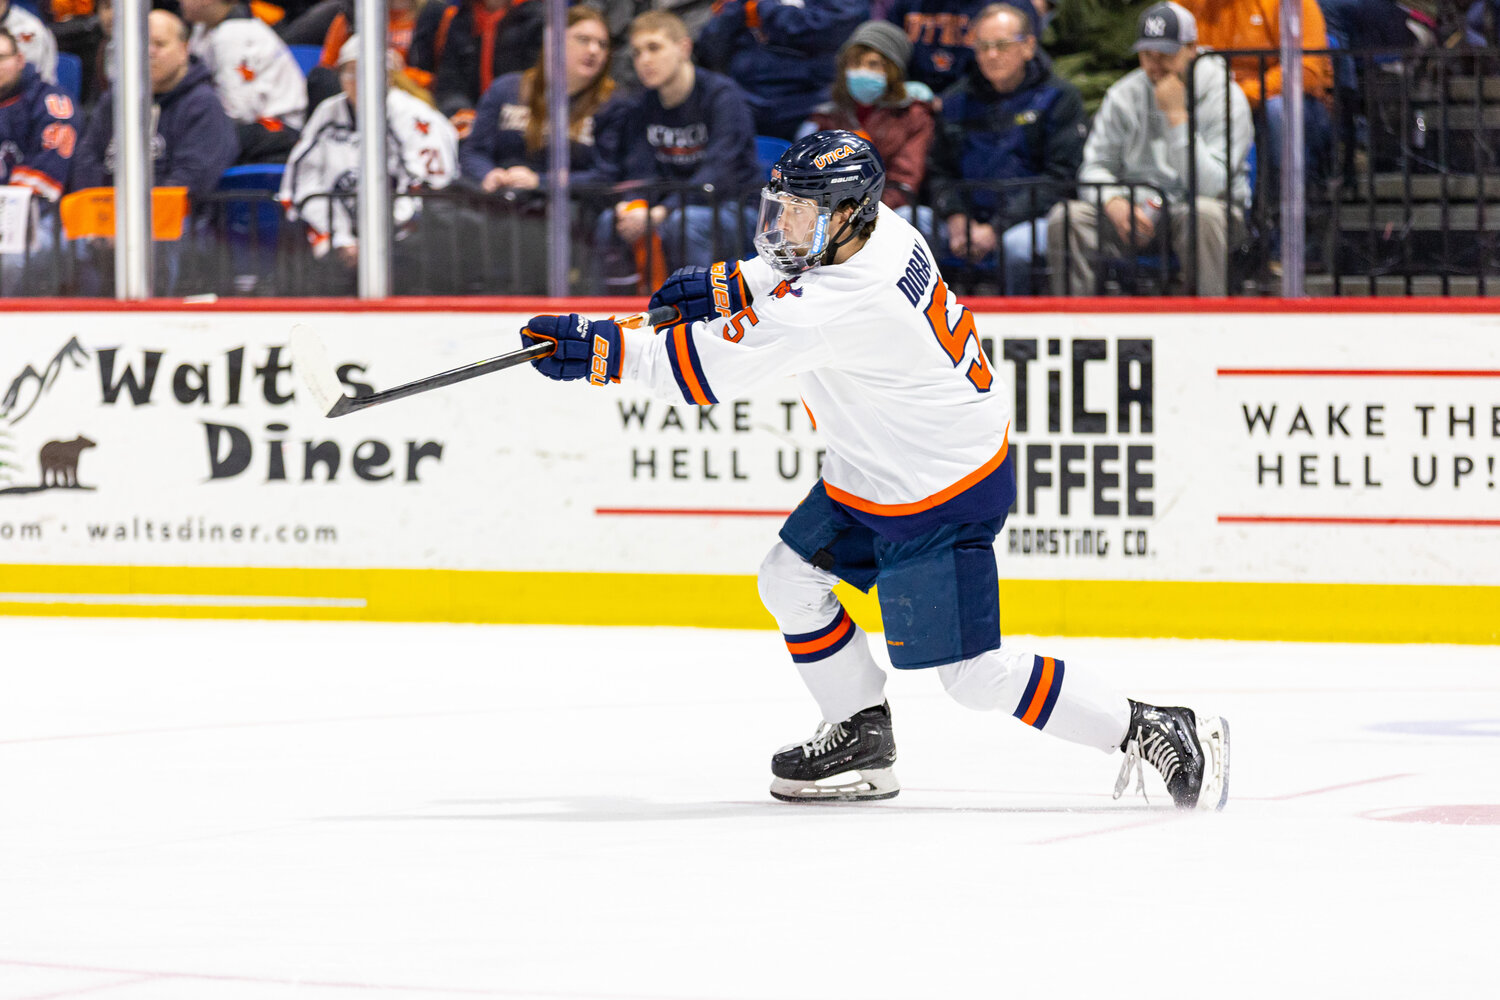 Jayson Dobay makes a play during a Utica University game during the 2022-23 season. Dobay earned first-team All-American honors from the American Hockey Coaches Association.